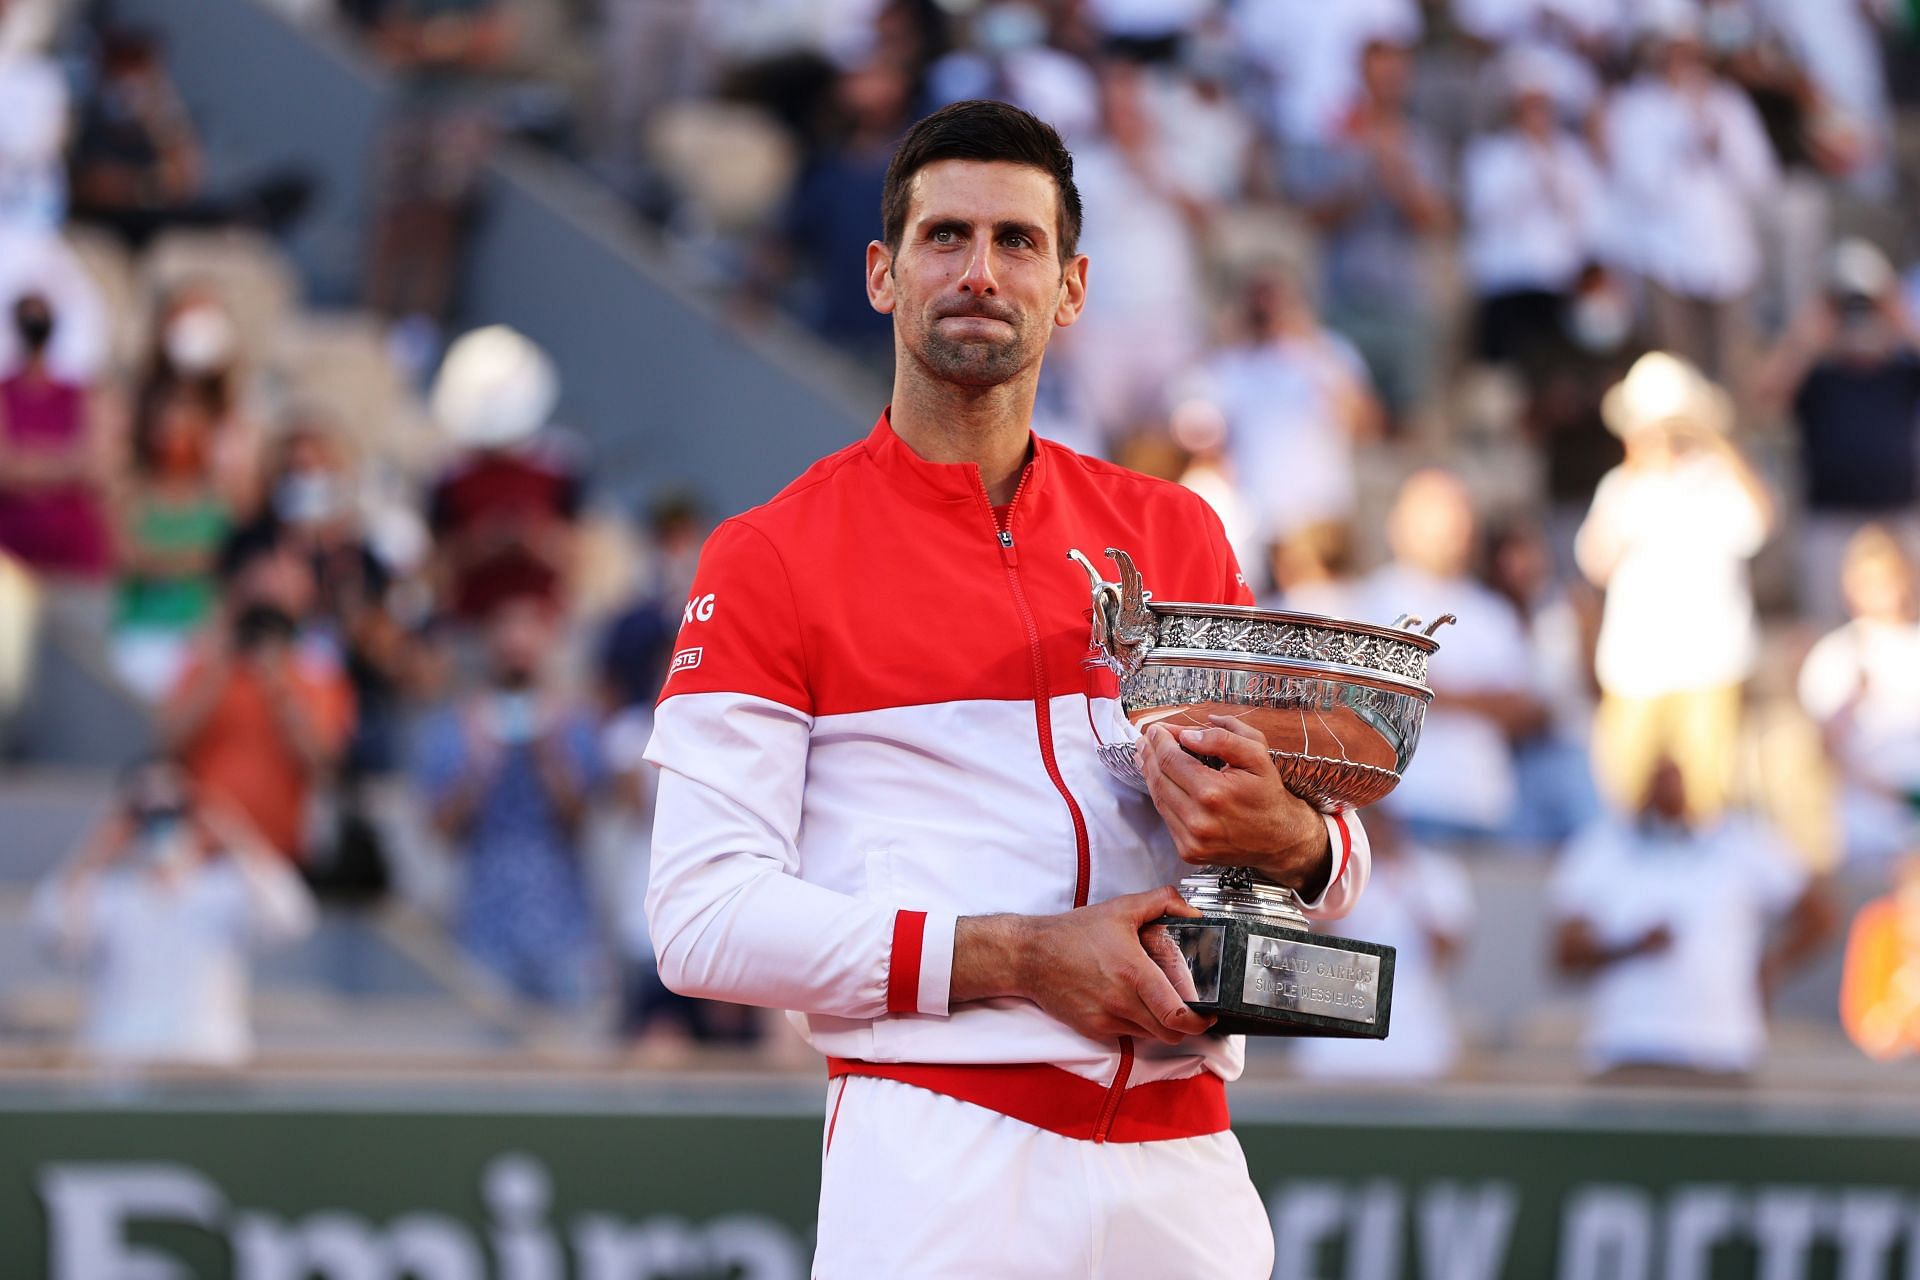 Novak Djokovic will look to win back-to-back titles at Roland Garros this year.